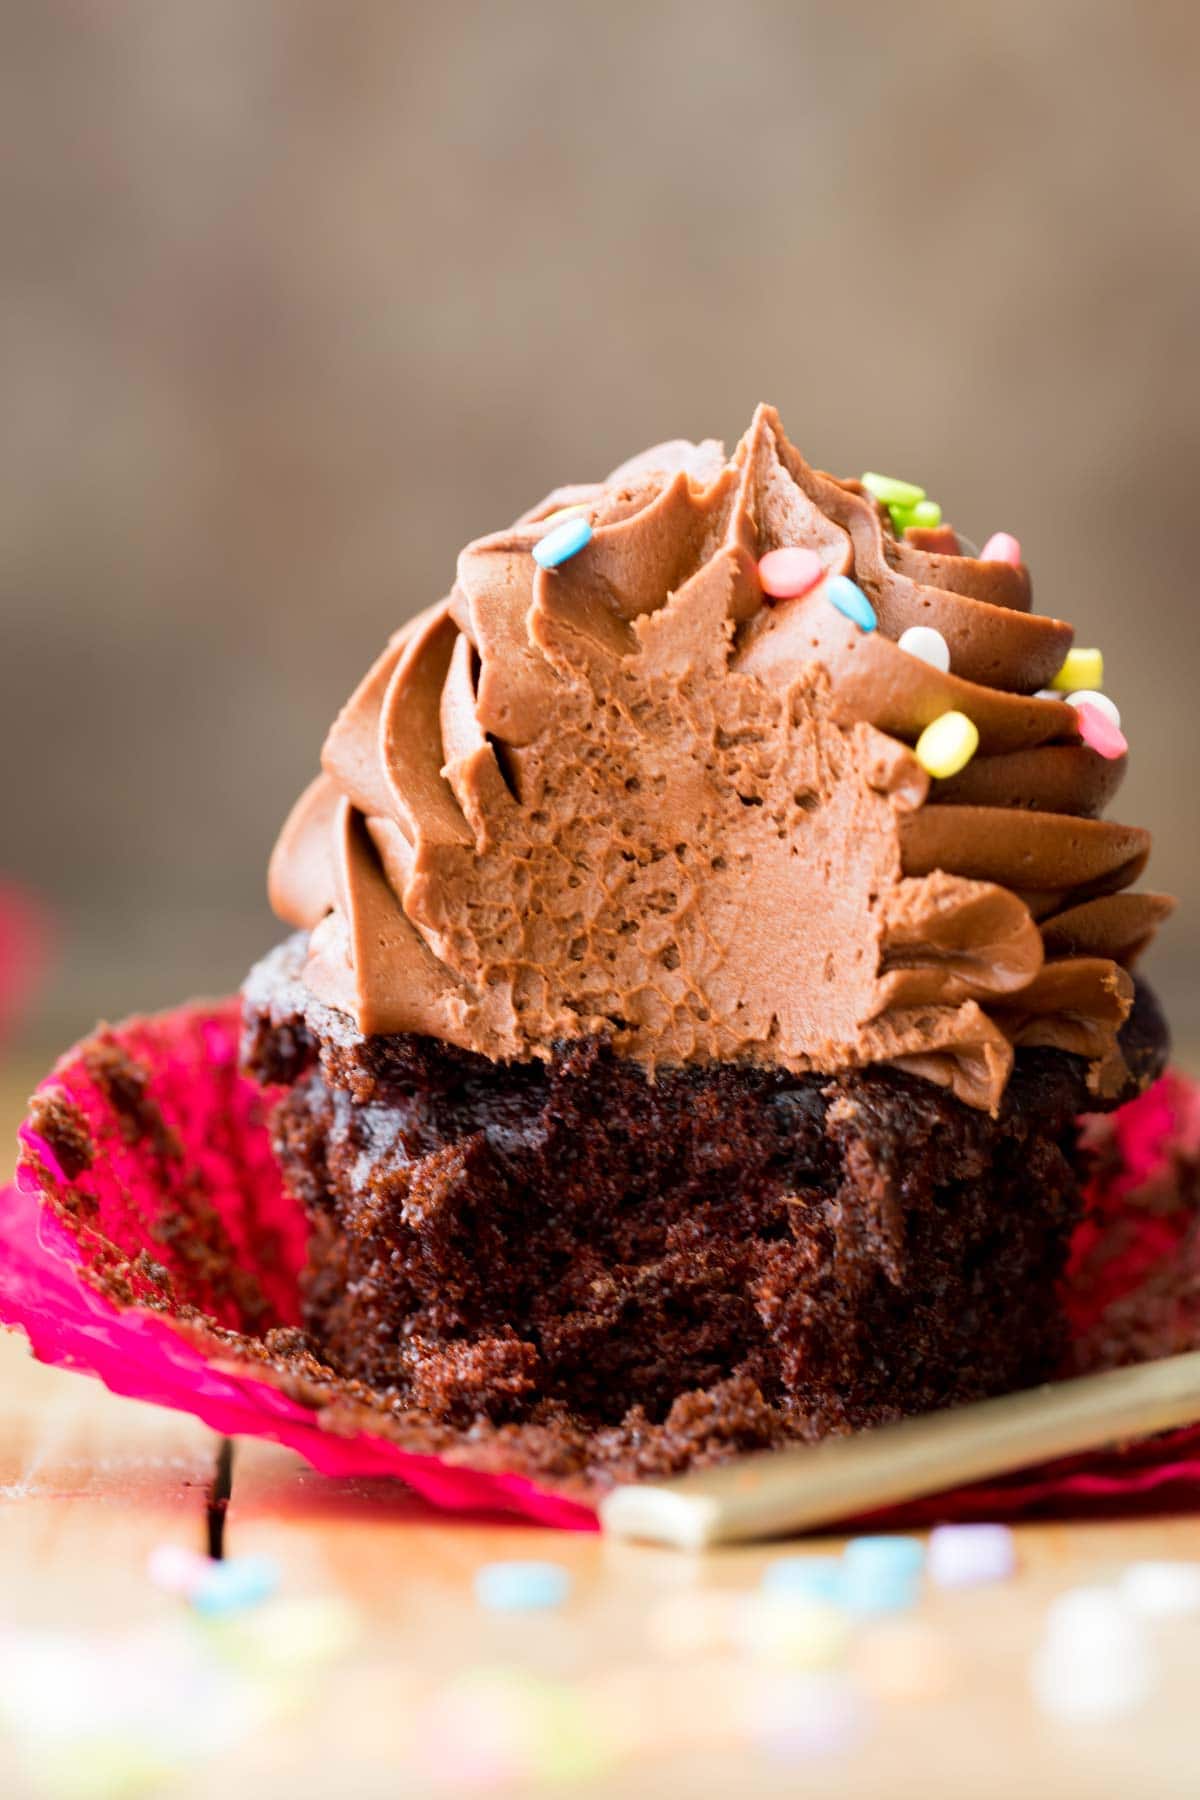 cupcake topped with lots of chocolate frosting missing a big bite